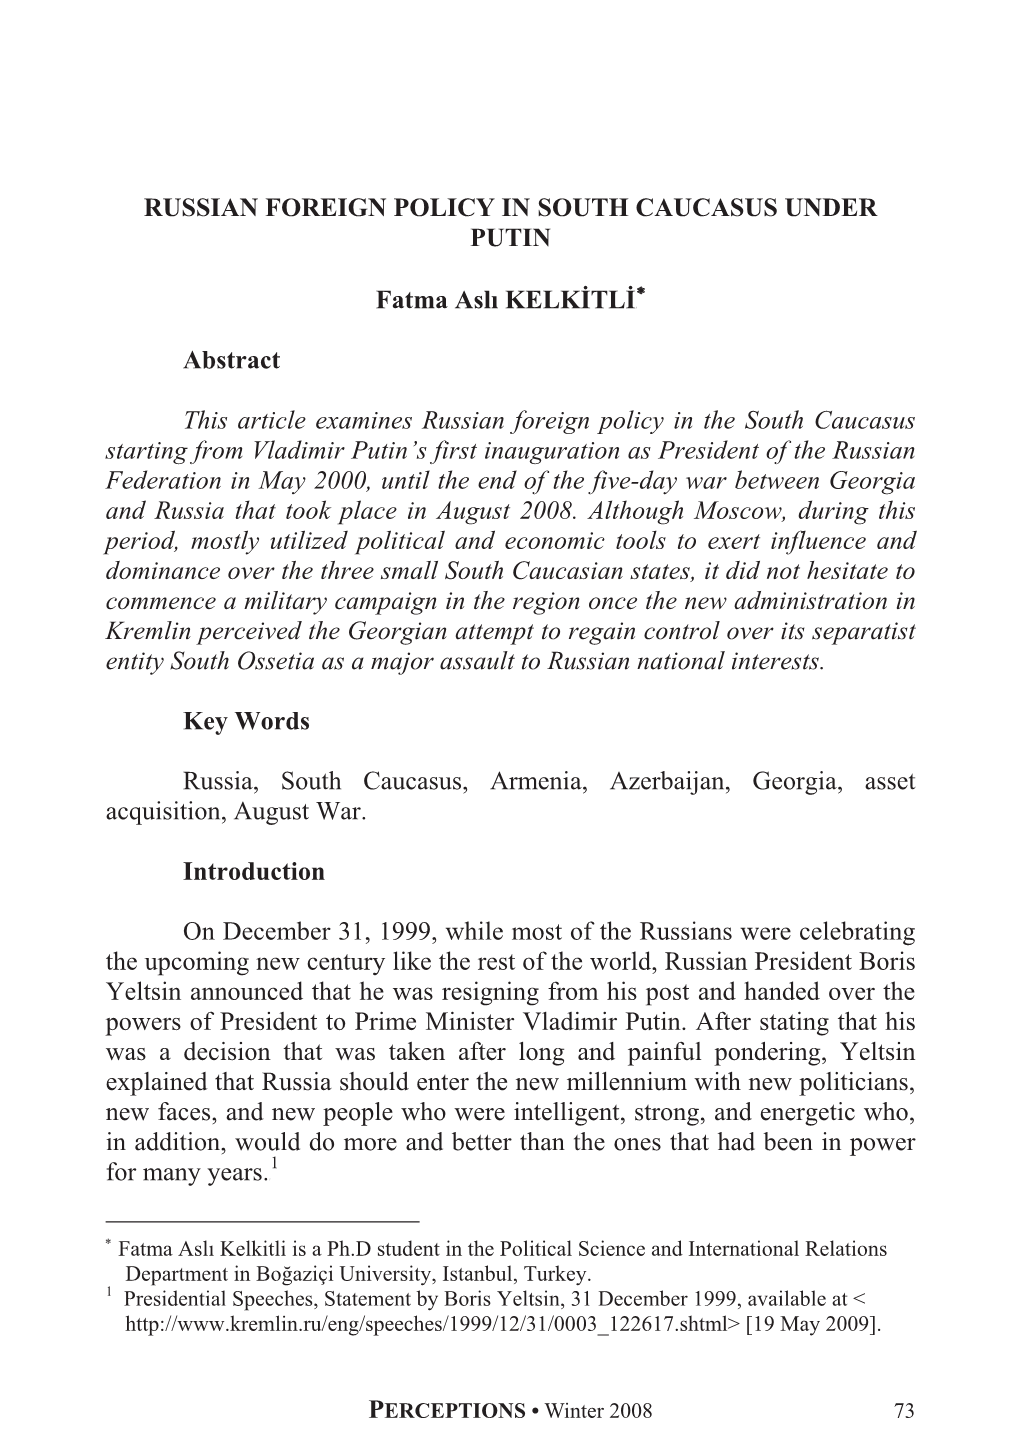 RUSSIAN FOREIGN POLICY in SOUTH CAUCASUS UNDER PUTIN Fatma Aslı KELKİTLİF Abstract This Article Examines Russian Foreign Poli